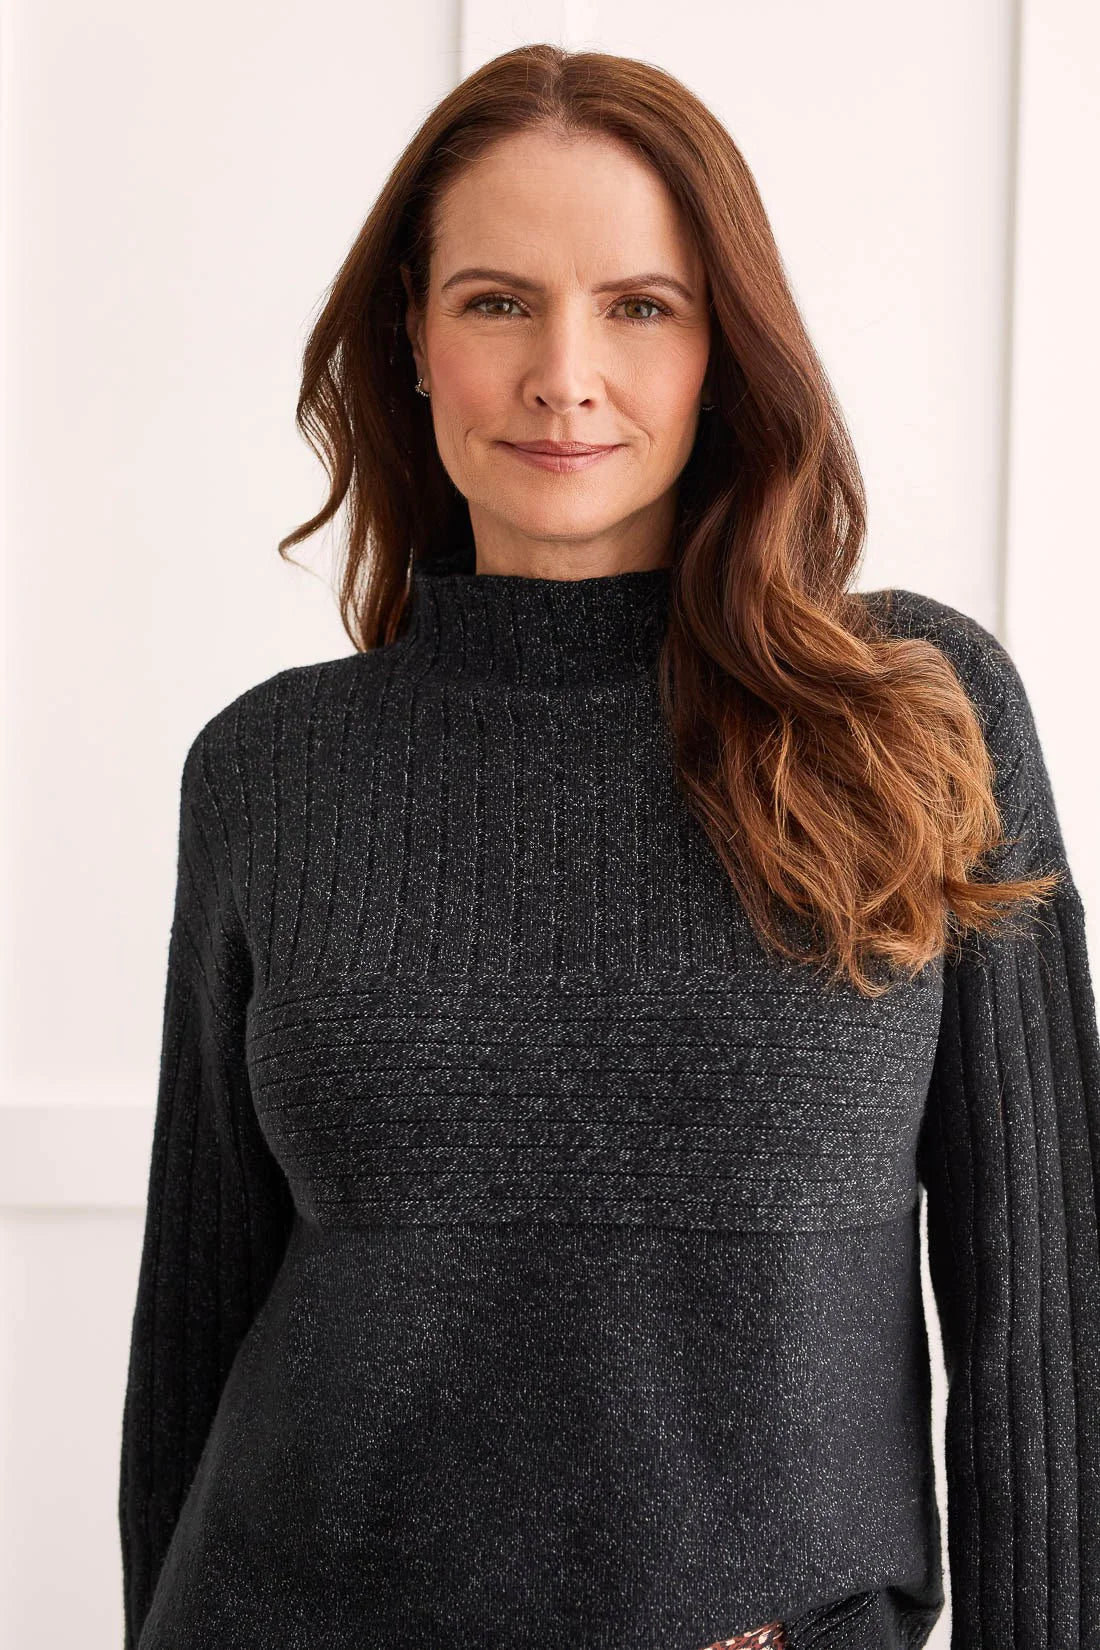 Make friends with a funnel neck sweater this season and it'll never let you down! We're falling hard for this pretty poly-blend piece that feels ultra-soft from the moment you slip it on.